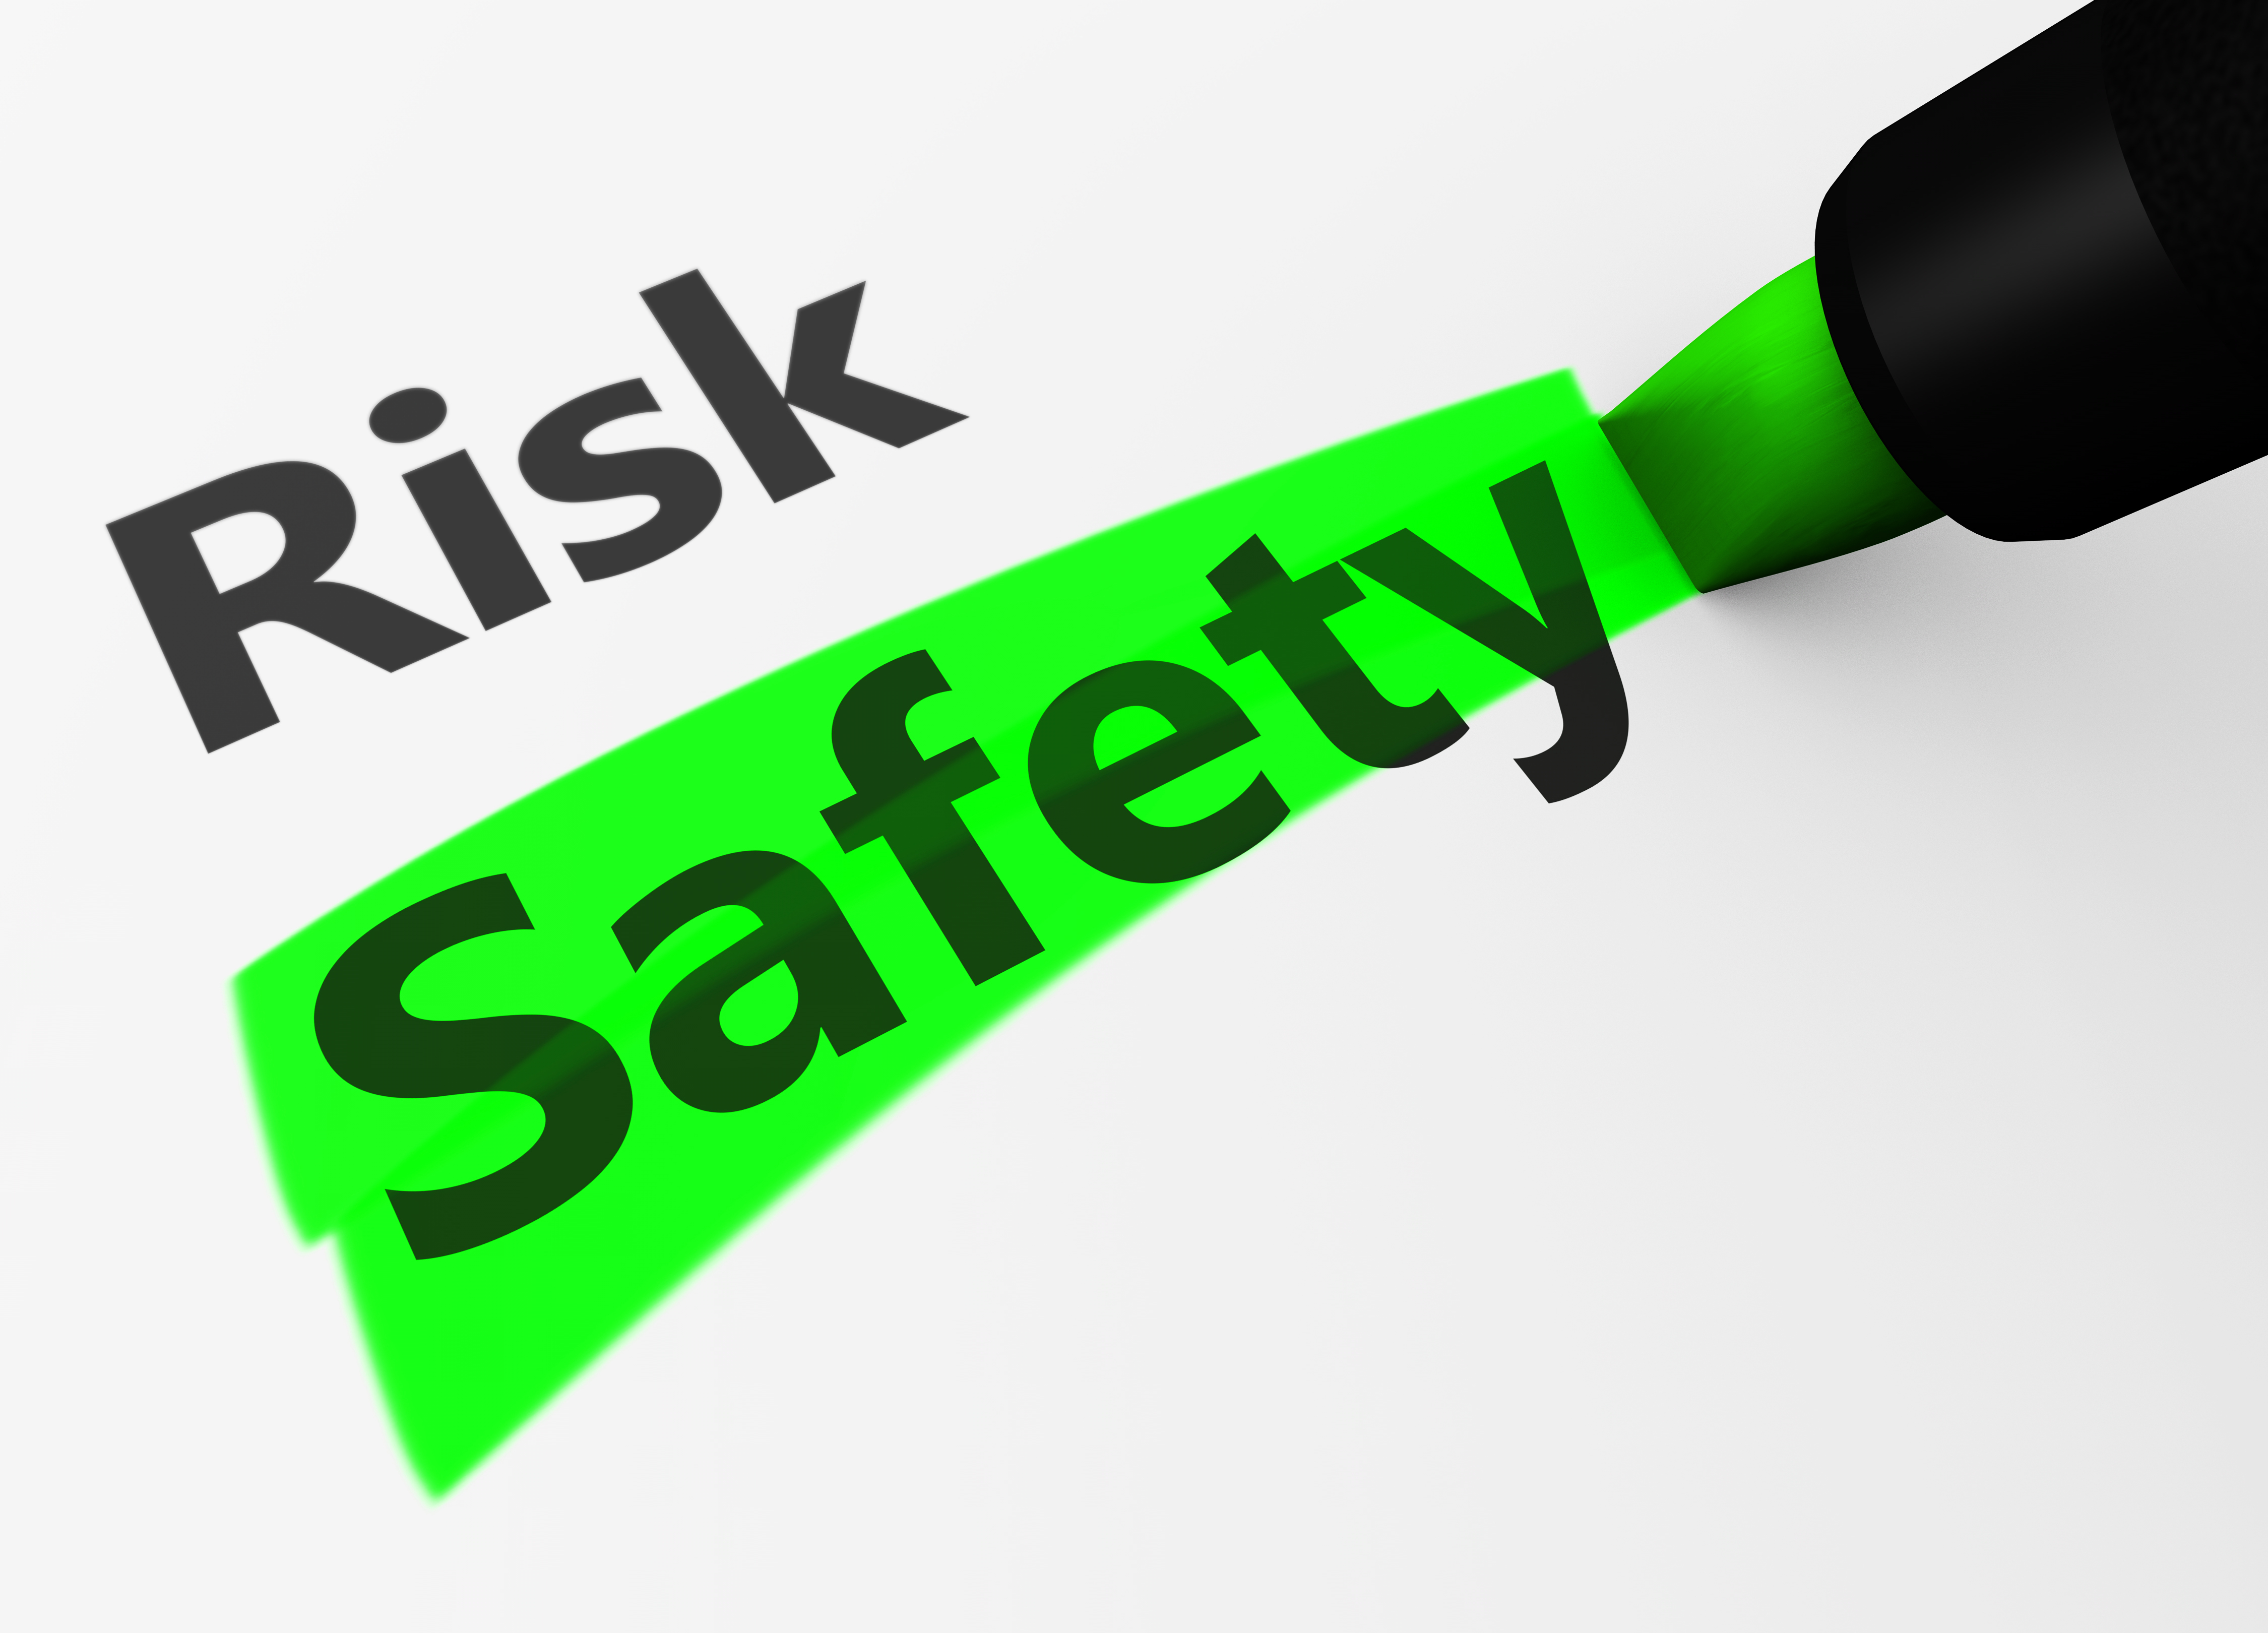 Safety risks associated with flash games